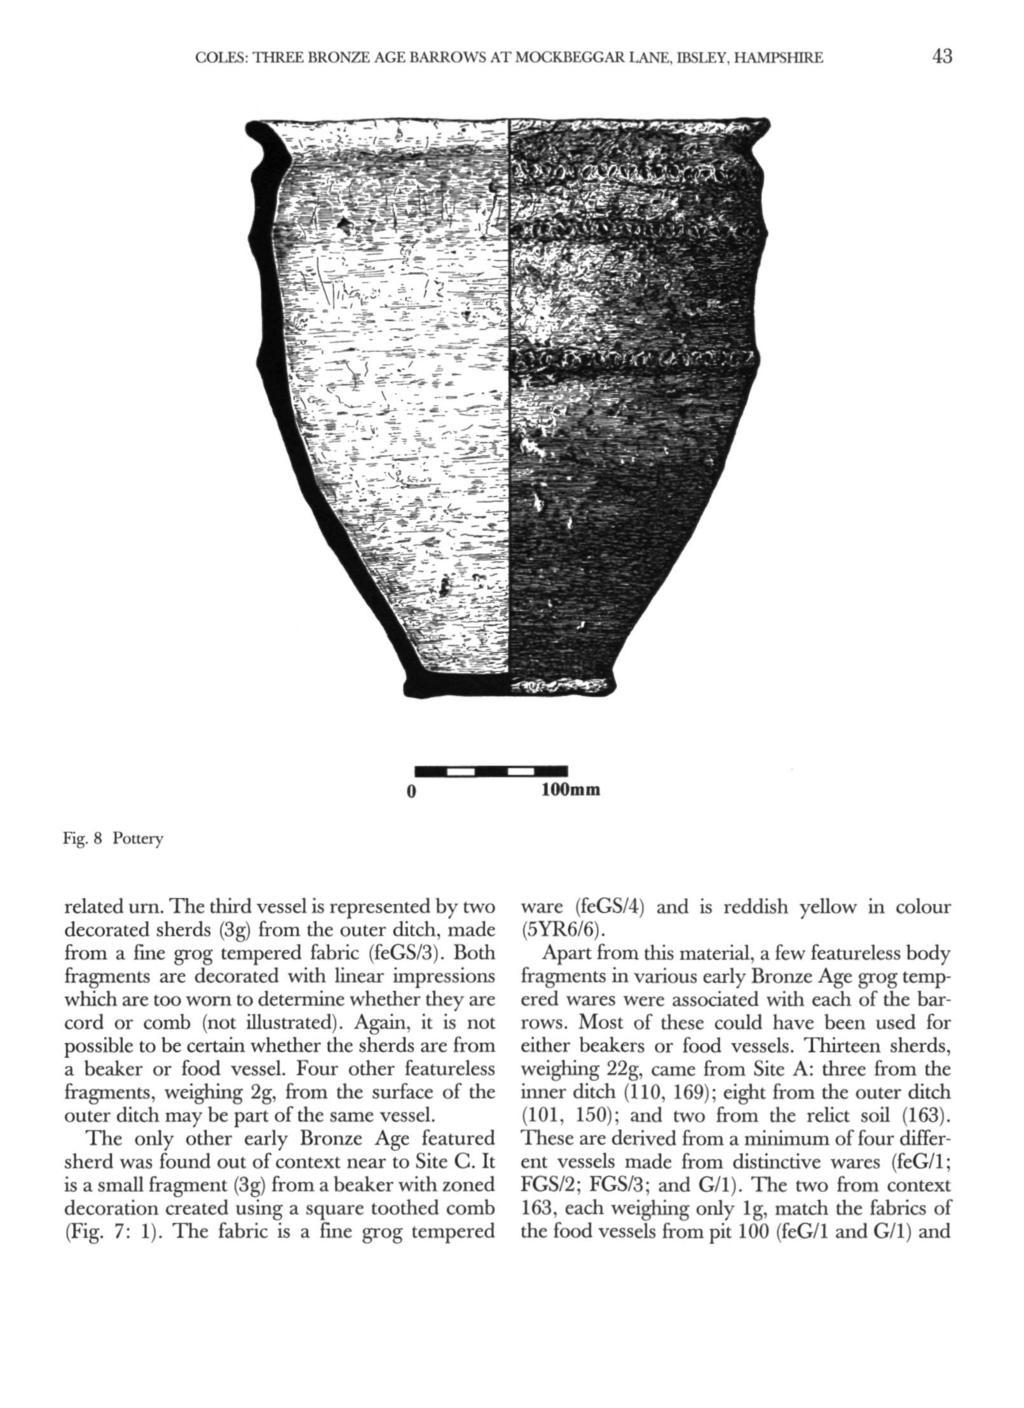 COLES: THREE BRONZE AGE BARROWS AT MOCKBEGGAR LANE, IBSLEY, HAMPSHIRE 43 100mm Fig. 8 Pottery related urn.